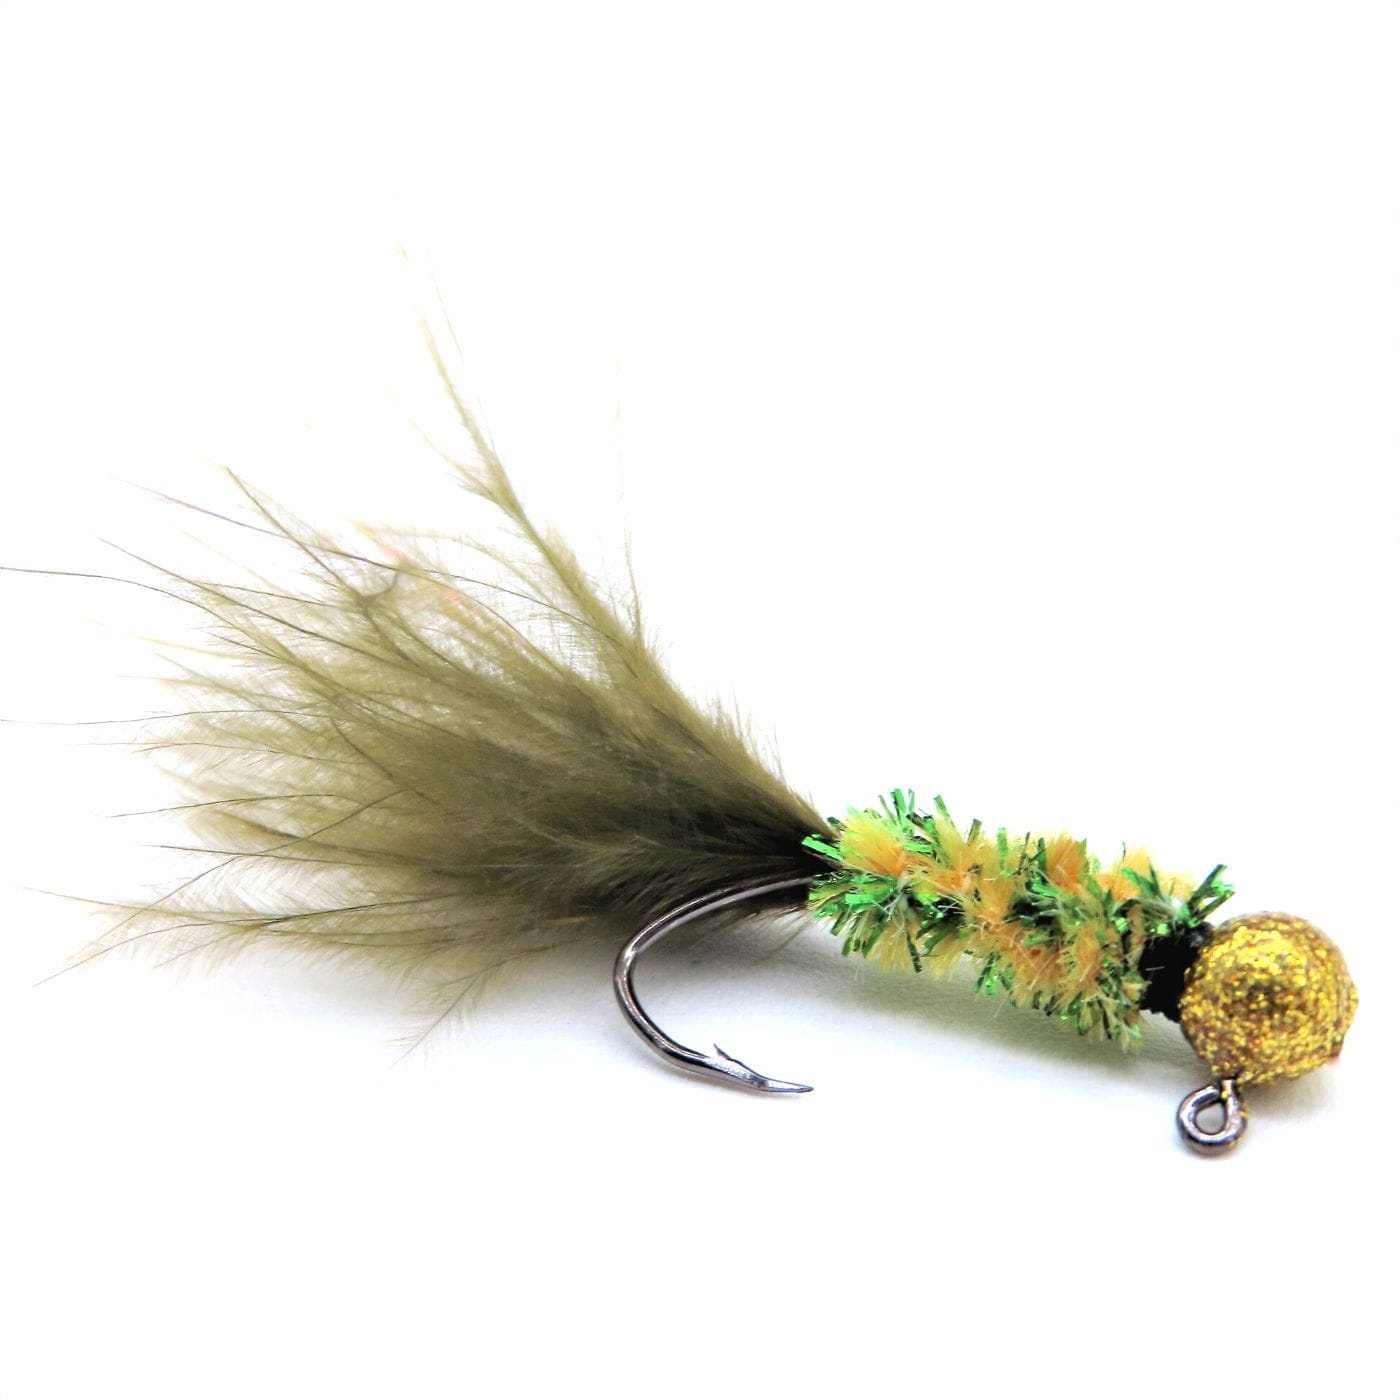 Hand tied Crappie jig featuring a Round Disco Gold jig head,new age chenille body, olive marabou tail and Gold flash. Hand tied onto a #4 Mustad sickle hook by Ramble Tamble Tackle